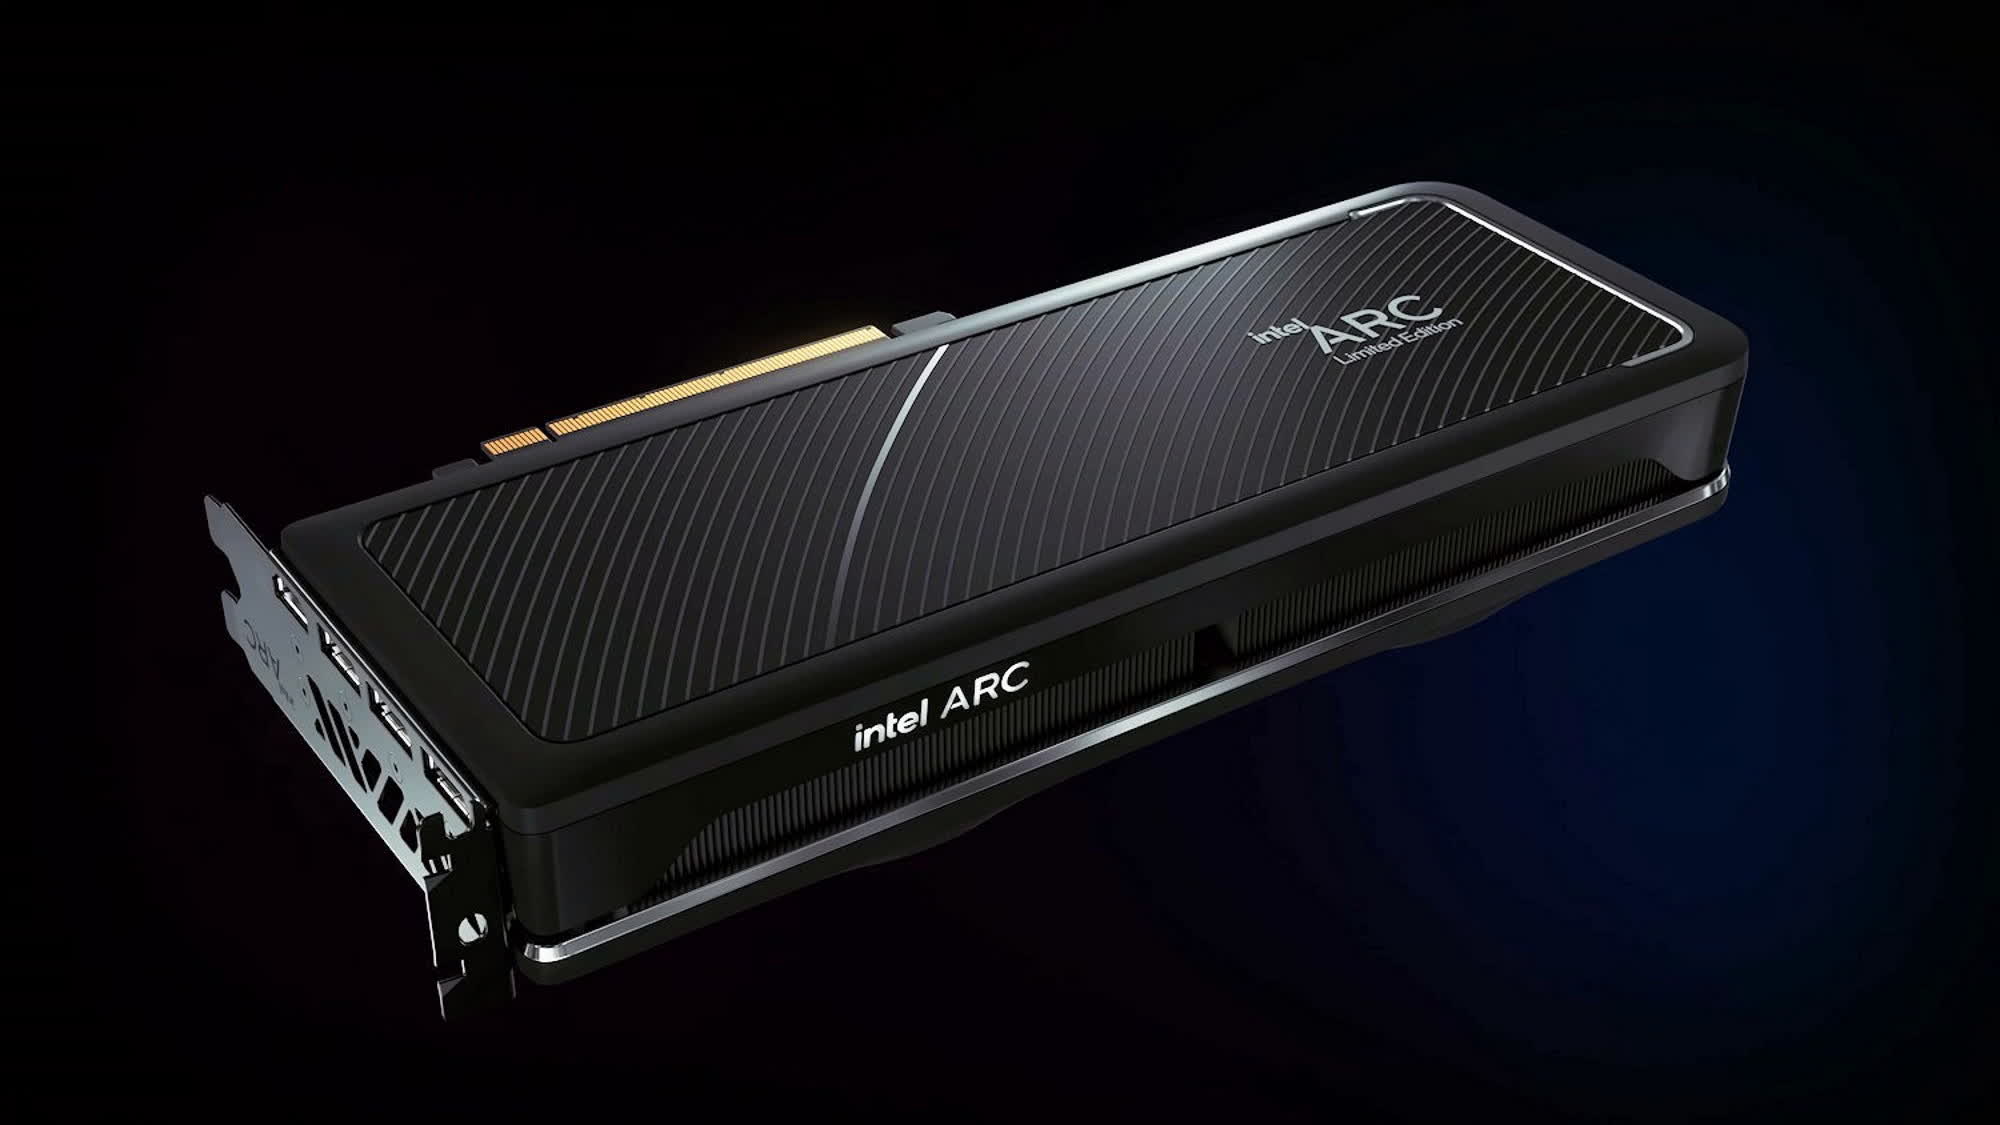 New Intel Arc “Game On” driver improves DirectX 11 performance up to 268%